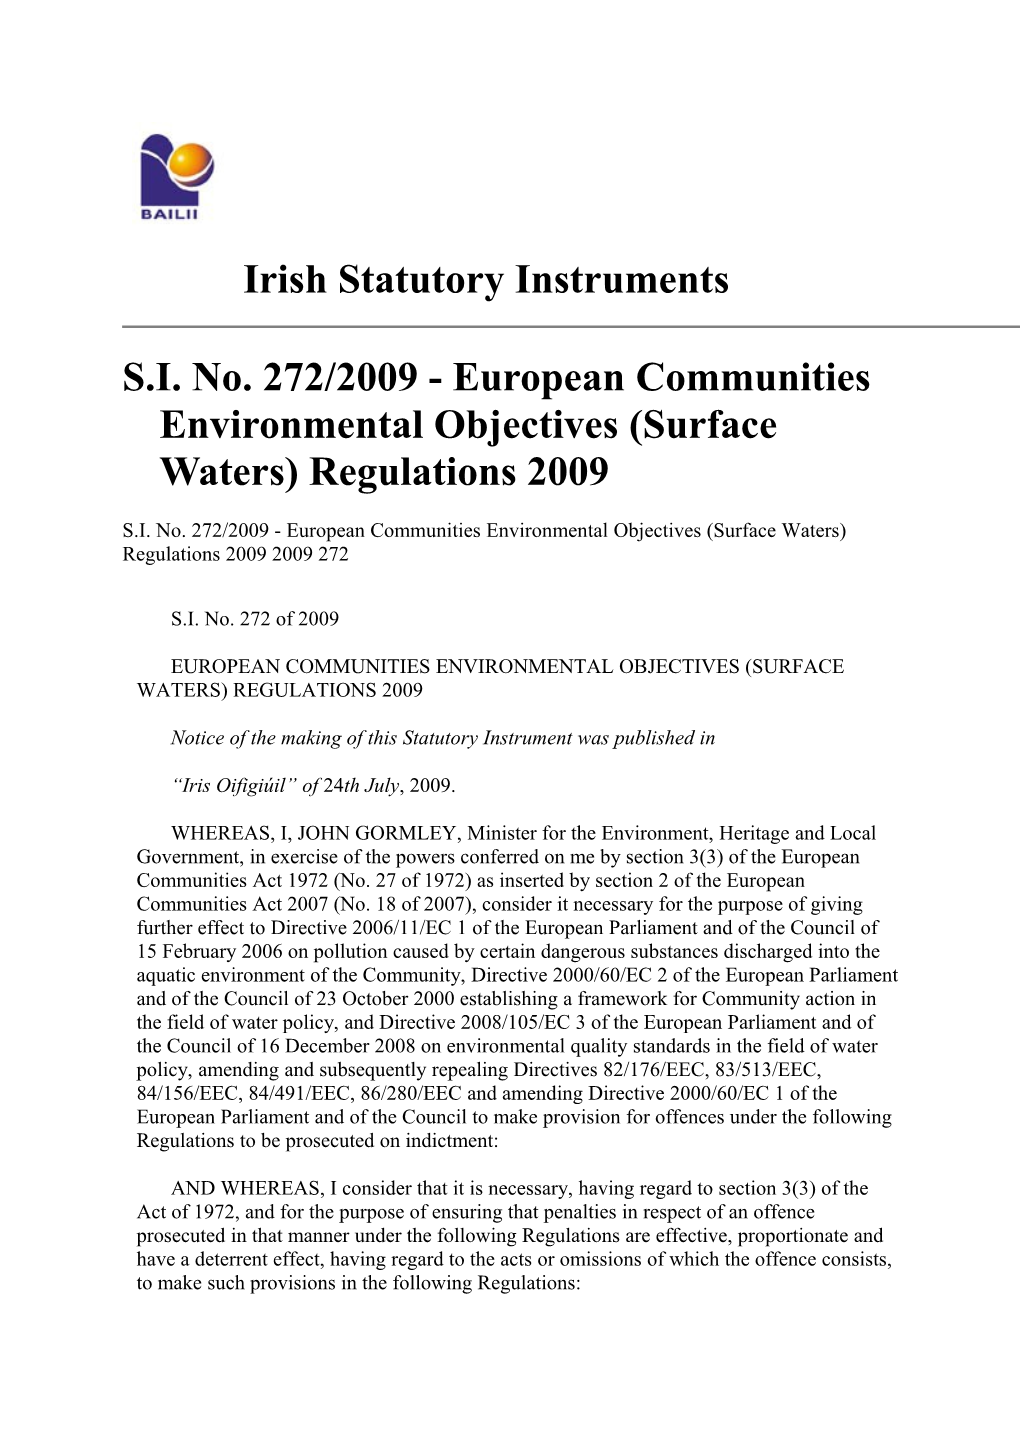 S.I. No. 272/2009 - European Communities Environmental Objectives (Surface Waters) Regulations